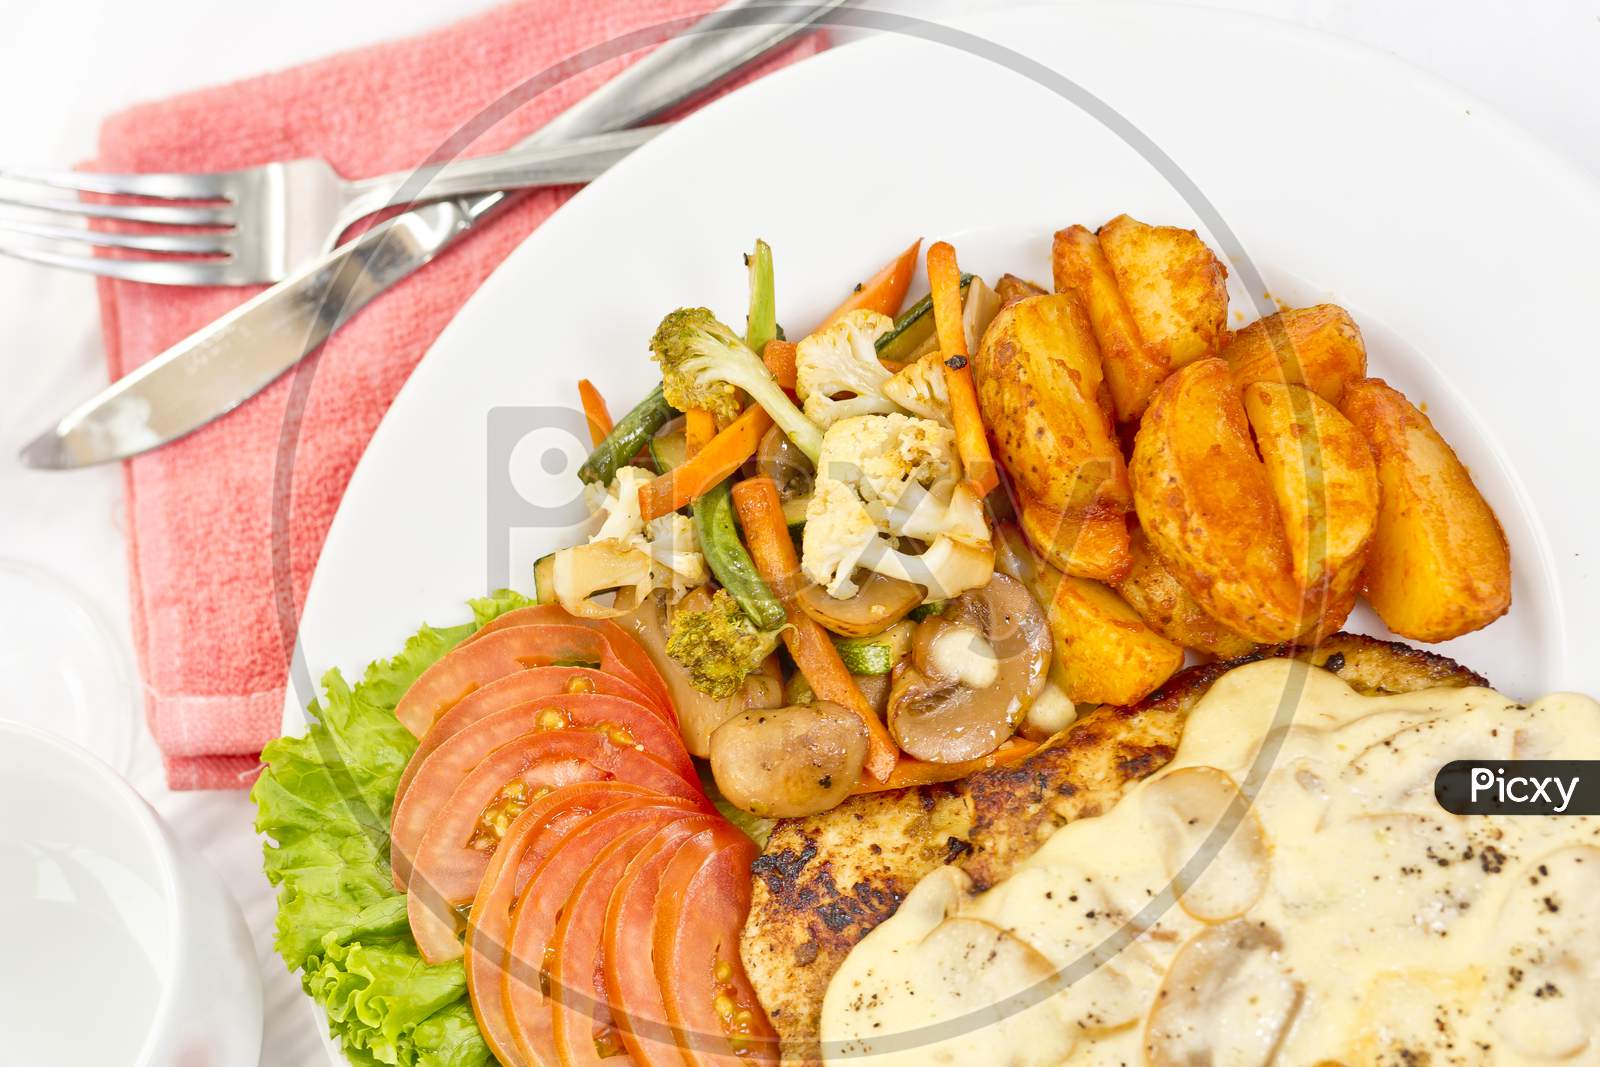 Peri Peri Chicken With Button Mushroom Gravy, Saute Vegetables, Spicy Fried Potatoes With Tomato Lettuce Salad.